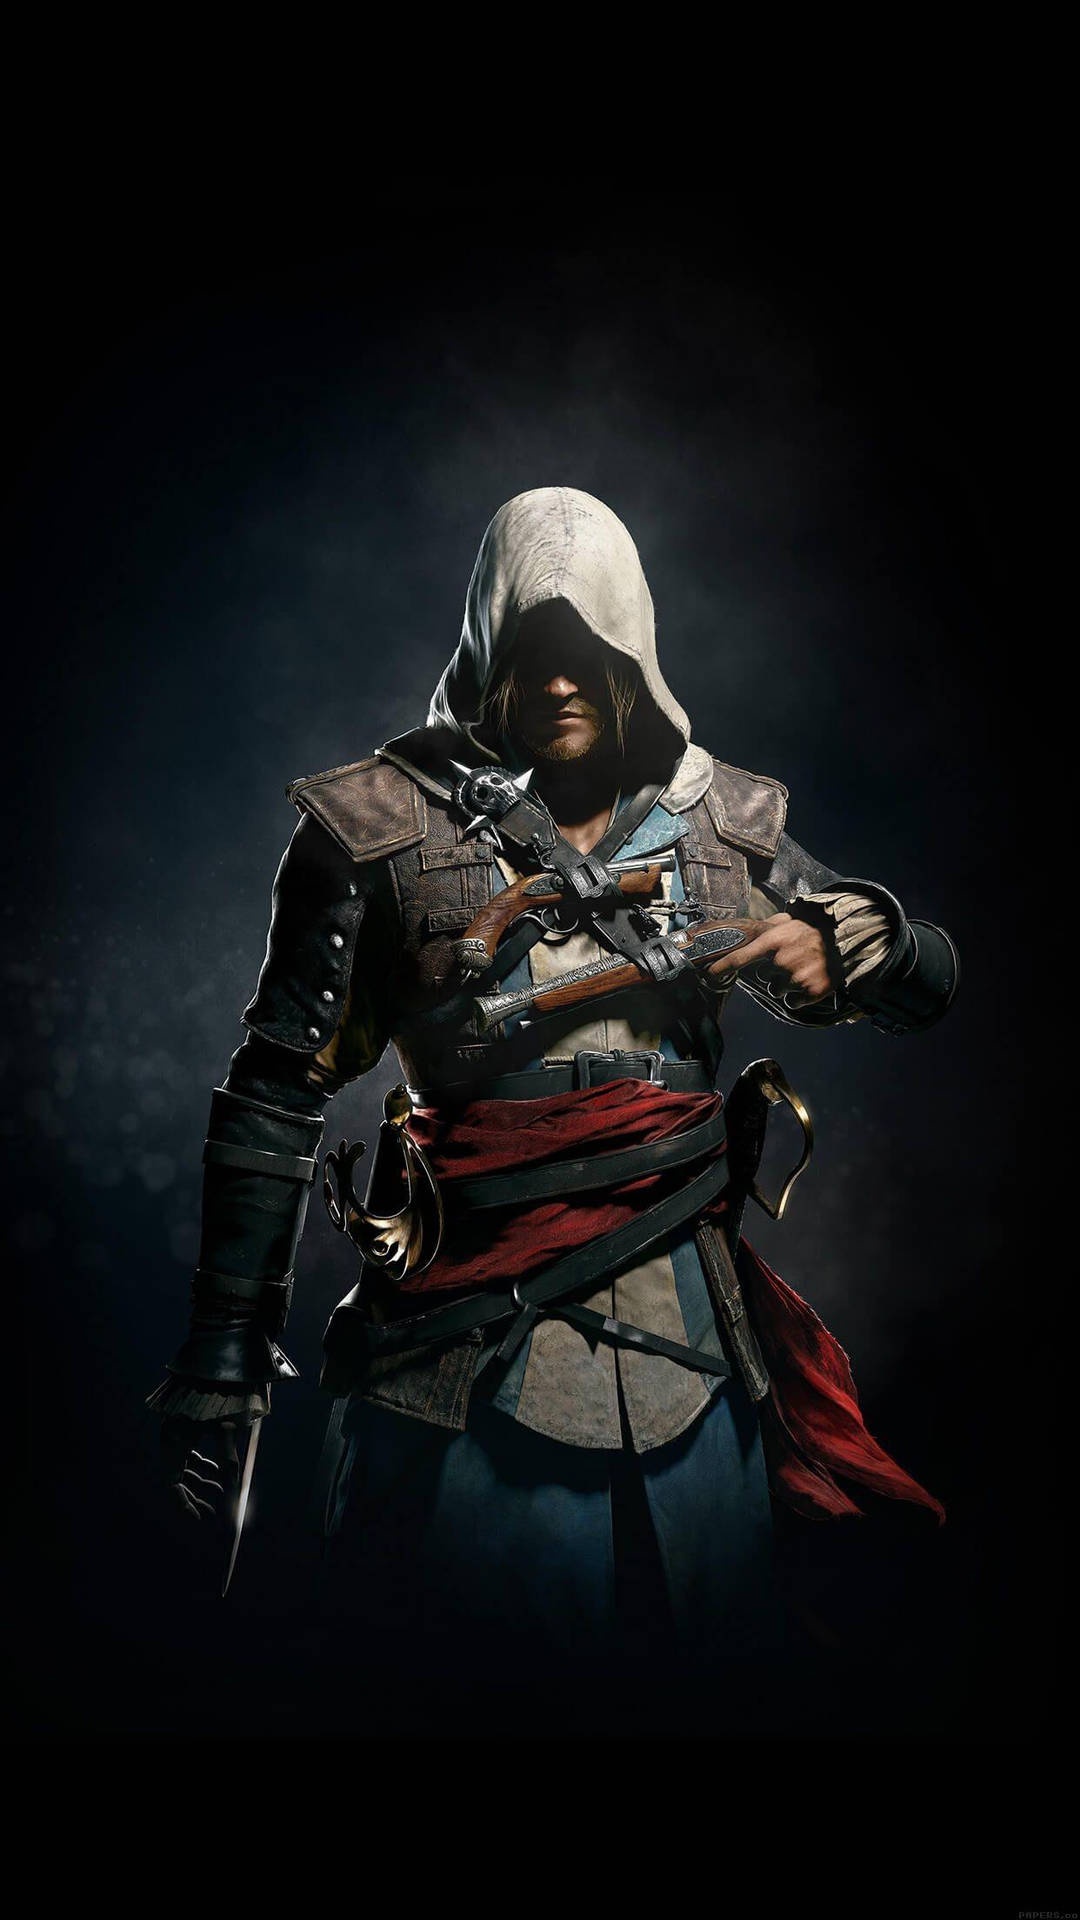 Edward Kenway in Assassin's Creed Action Scene Wallpaper